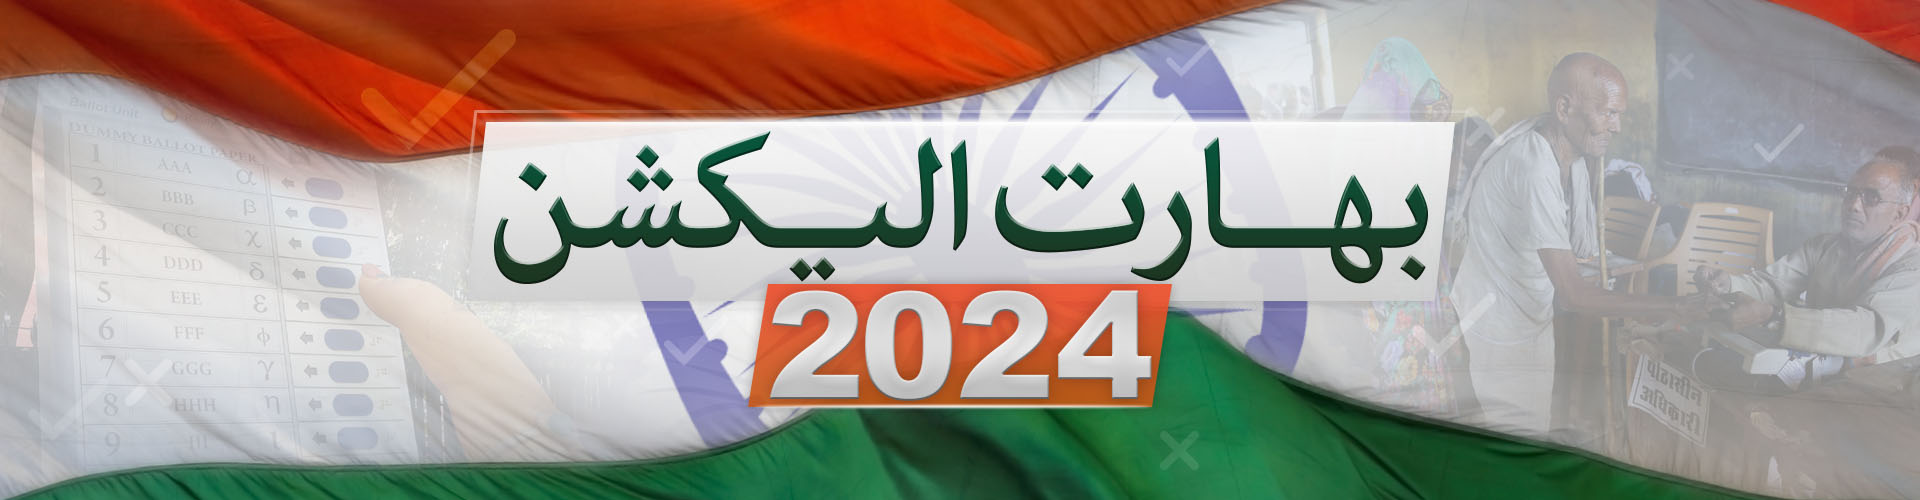 India Elections 2024